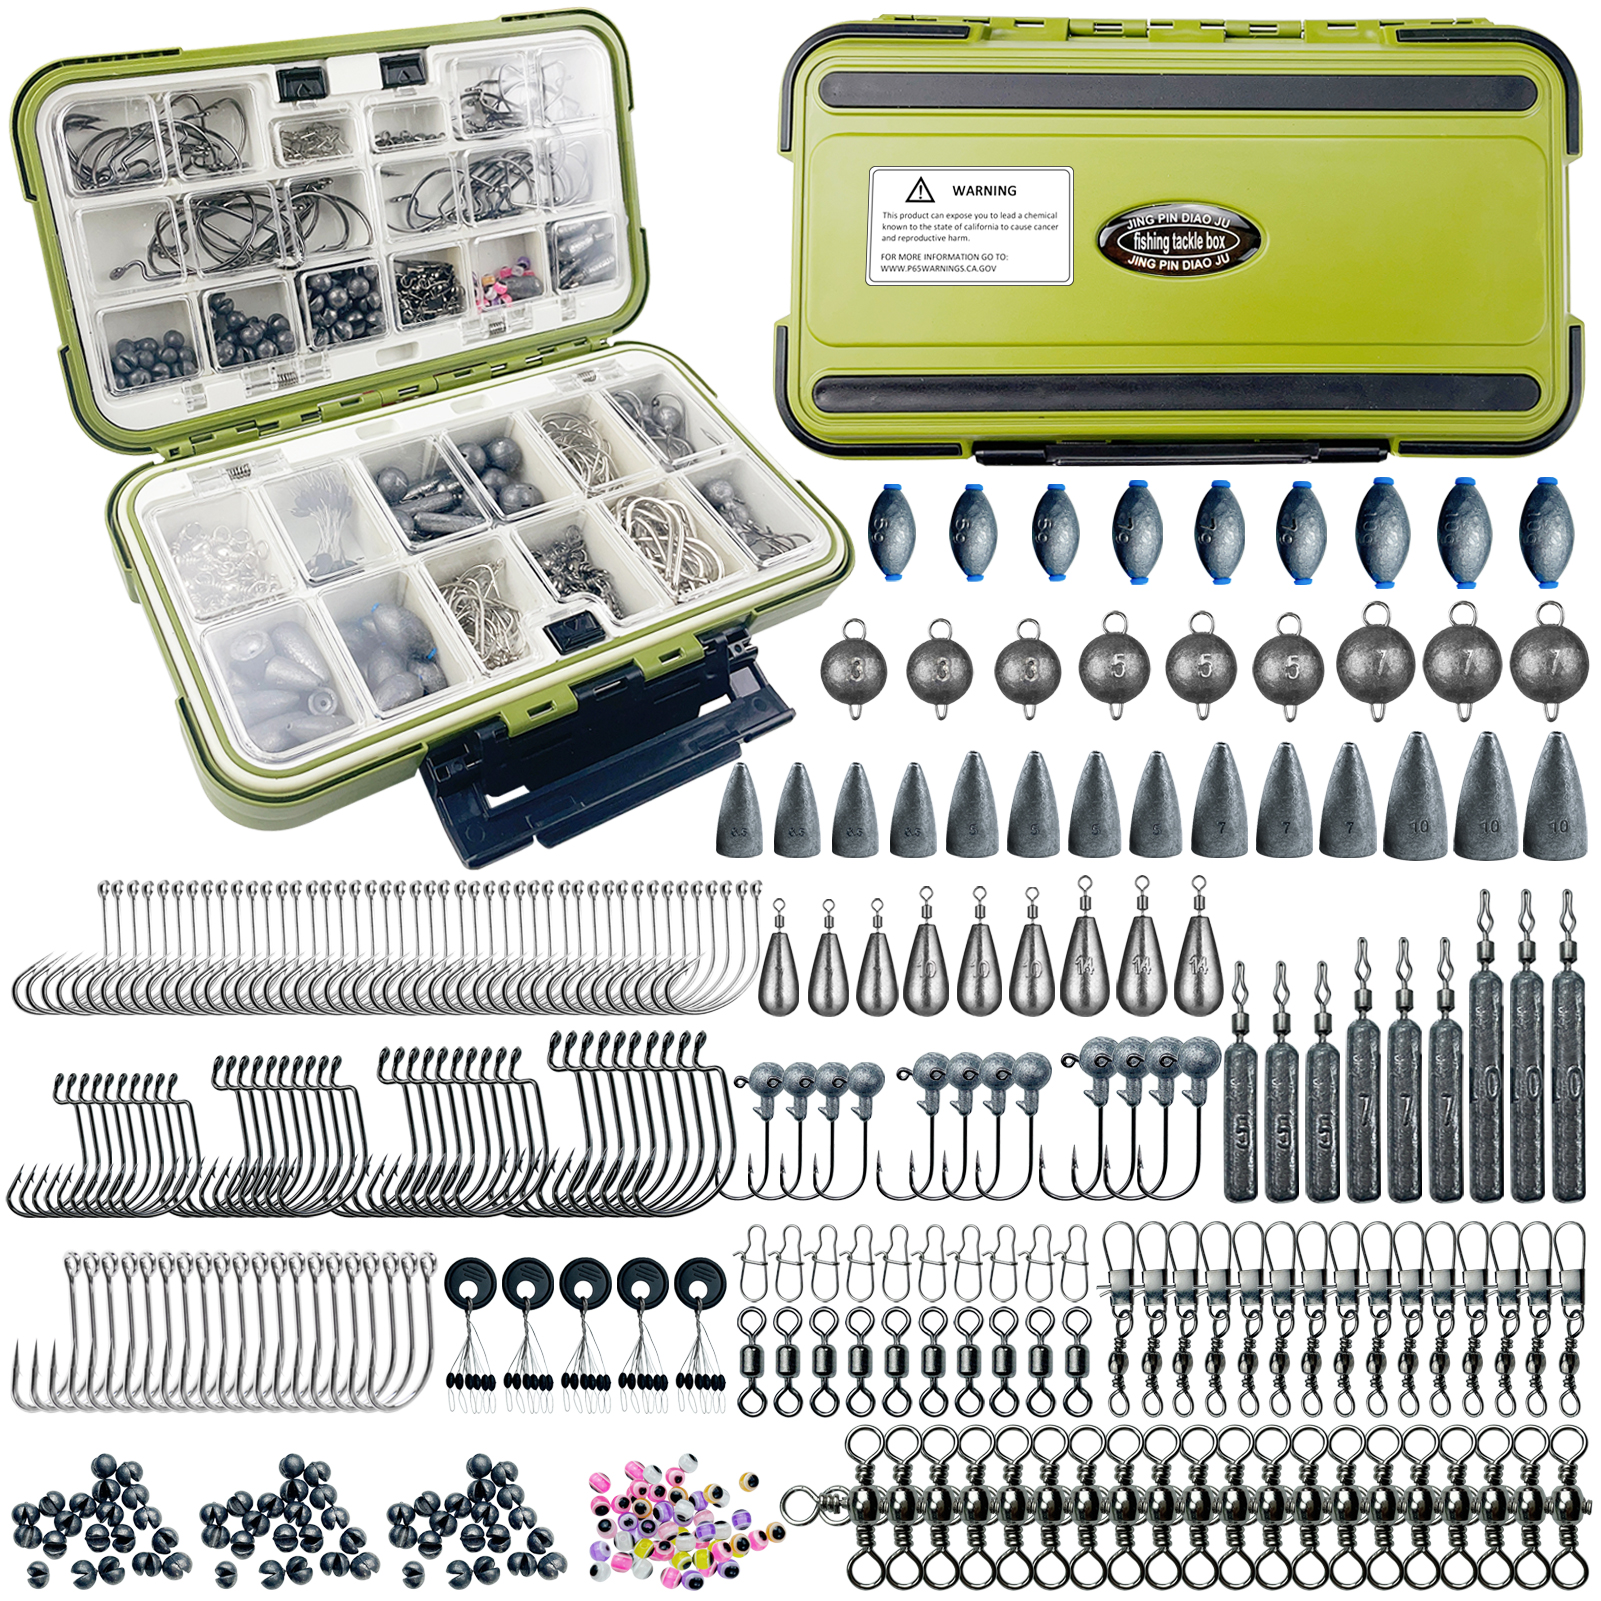 FREE FISHER 308pcs Fishing Weights Set Mixed Lead Sinkers Crank Jig Hooks Bait Lure Acceccories Swivels Snaps Beads with Multigrid Box for Freshwater/Saltwater